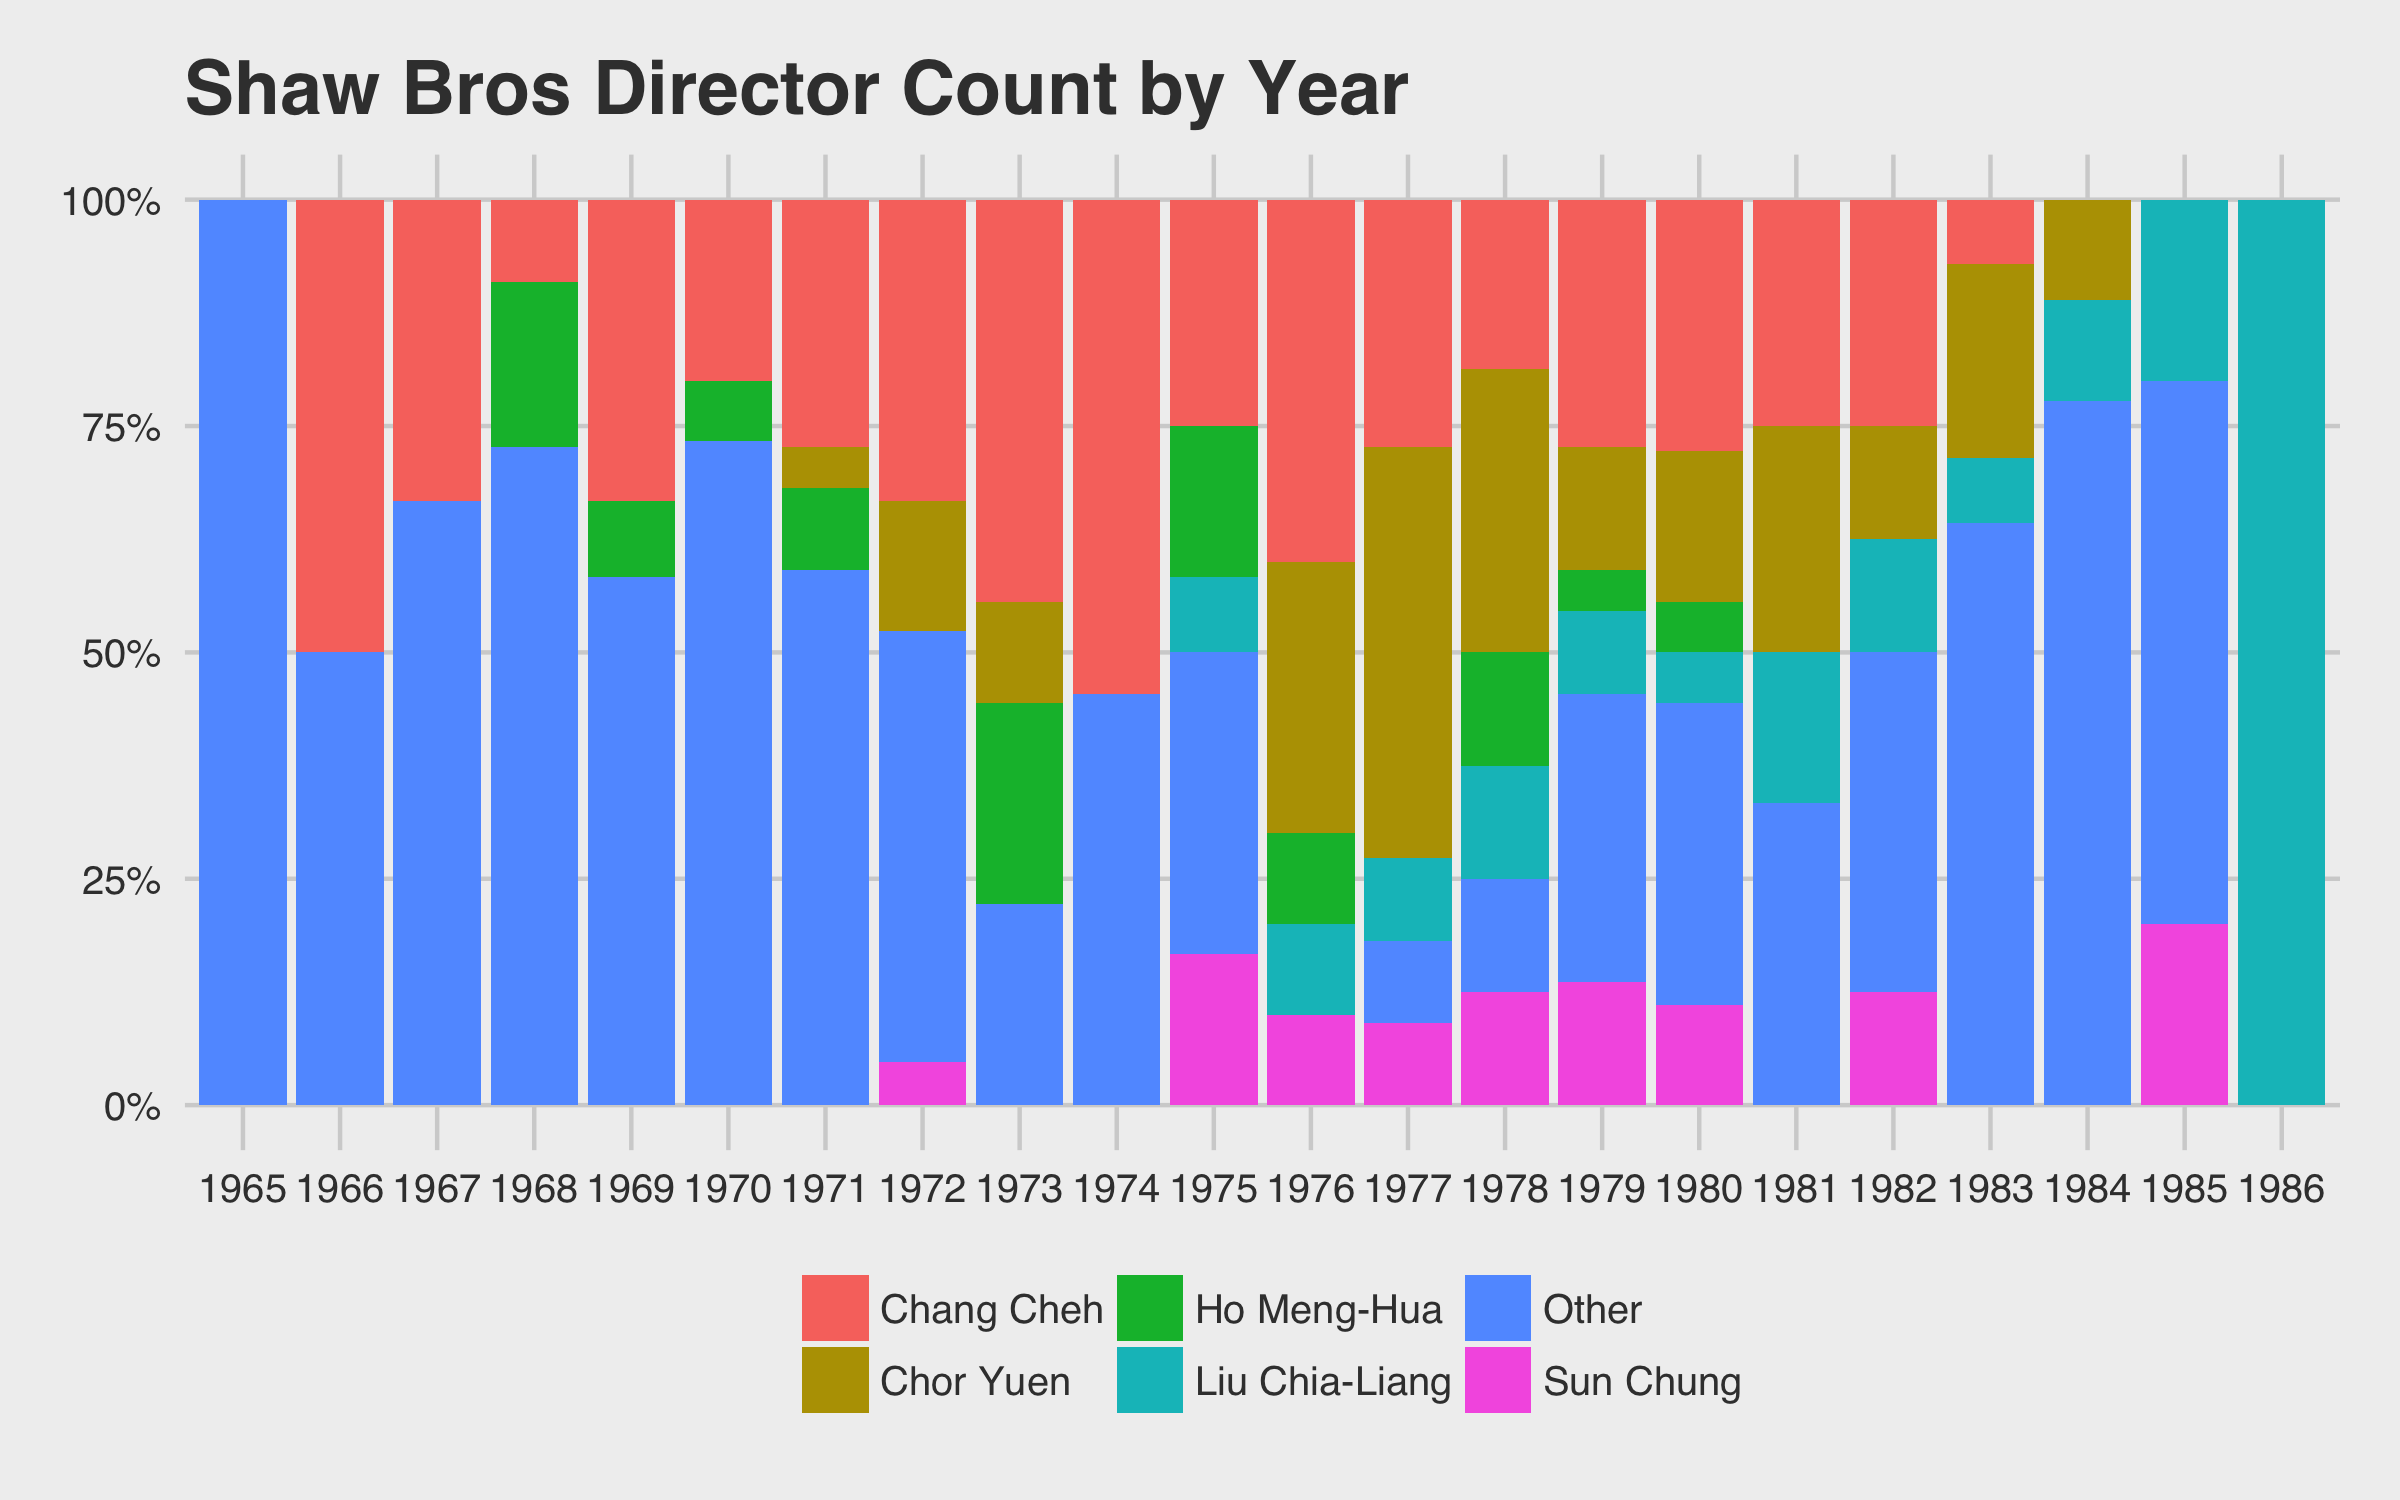 Top Directors by Year